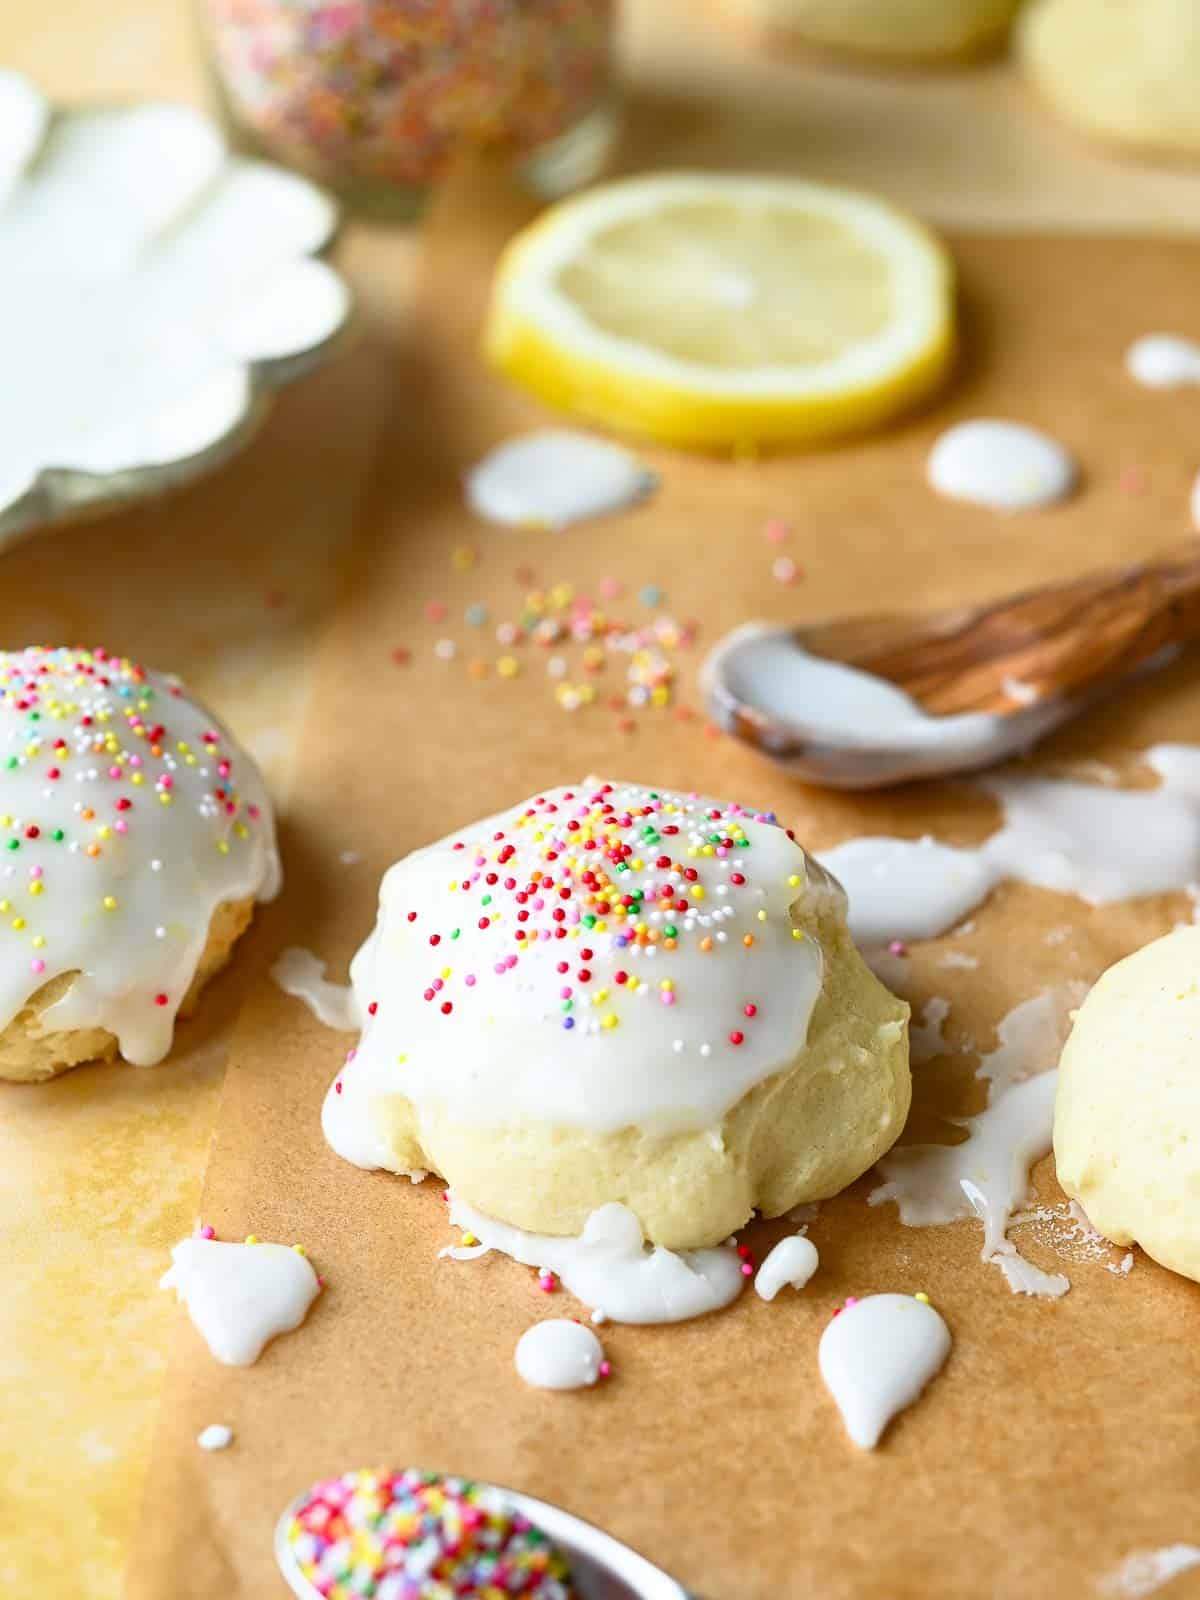 Italian lemon drop cookies with icing and sprinkles on parchment paper with lemons and sprinkles in the background.